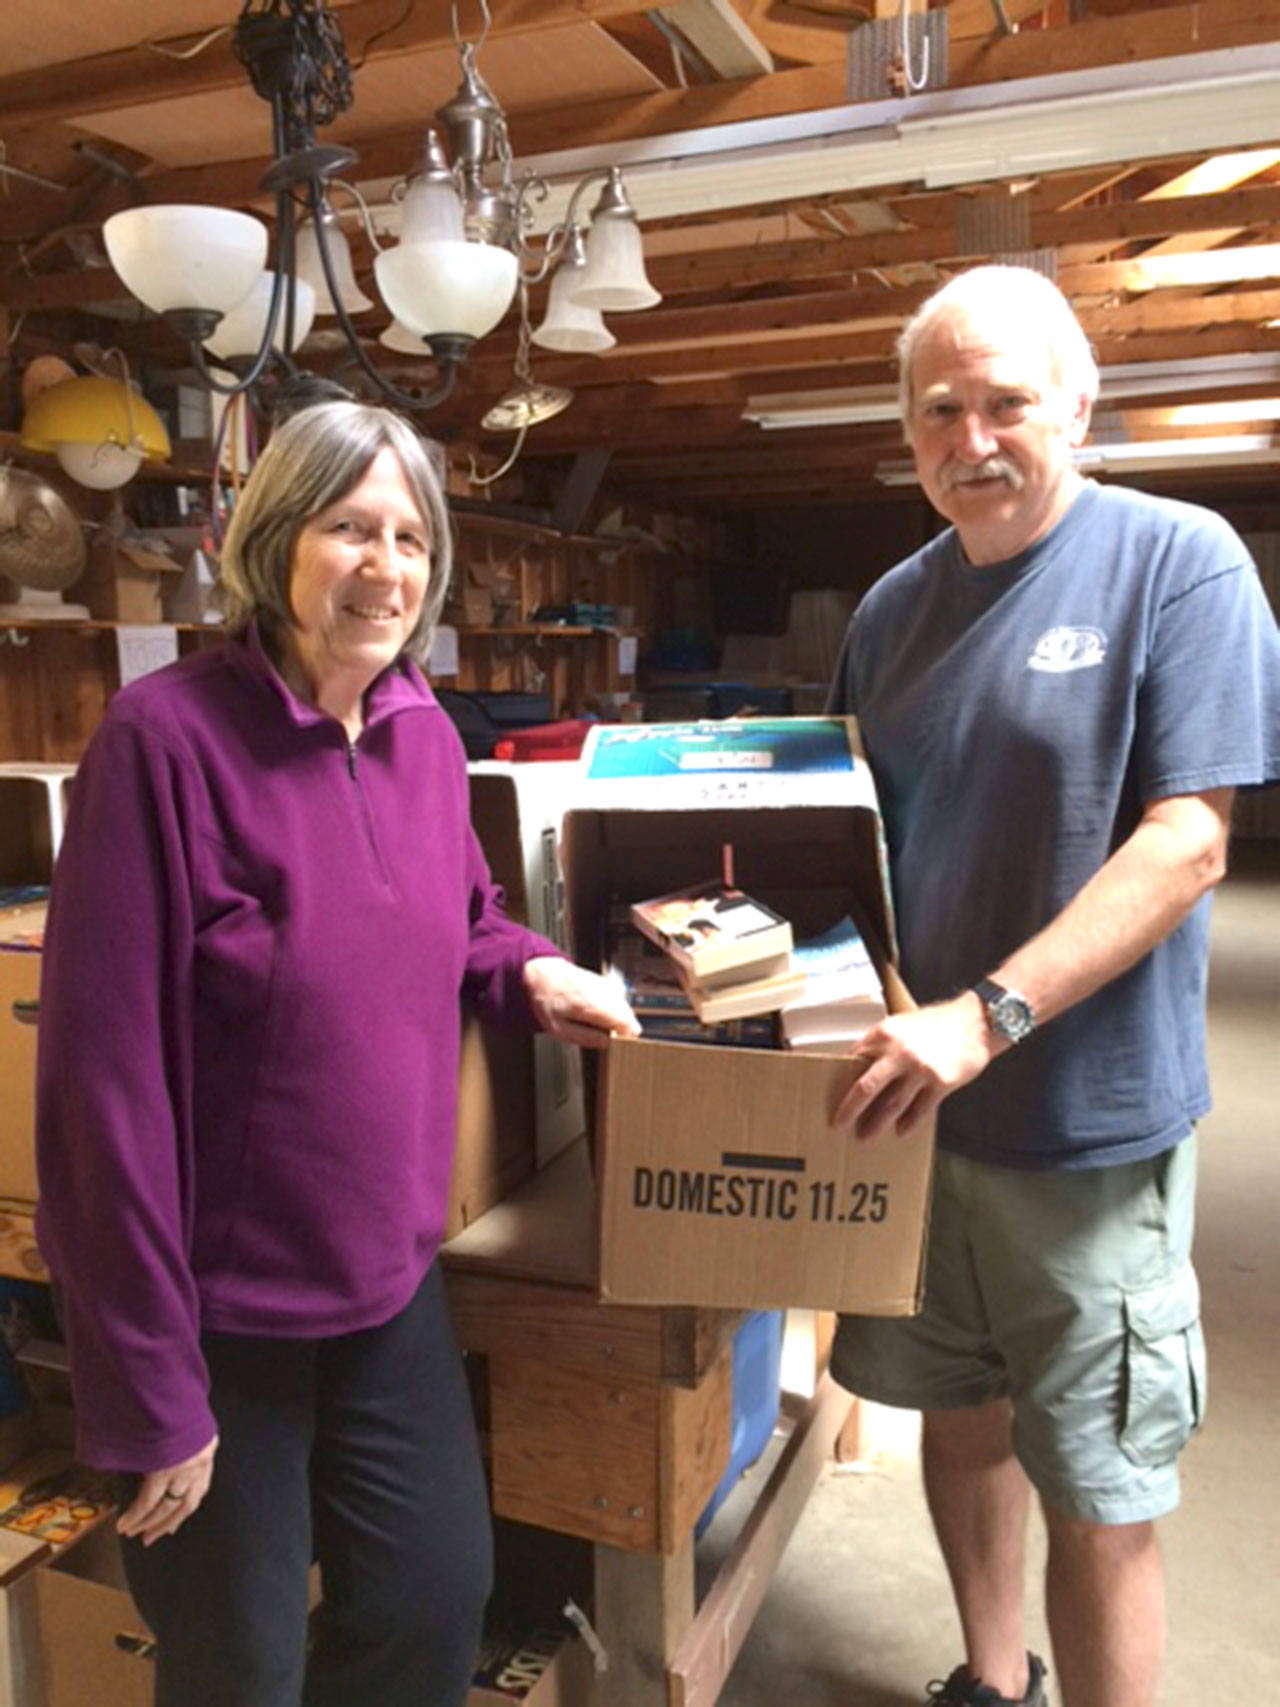 Alix Kosin and Howie O’Brien sort more than 5,000 books in preparation for the big Greater Hansville Community Center book sale June 9-11. (Annette Wright / Contributed)